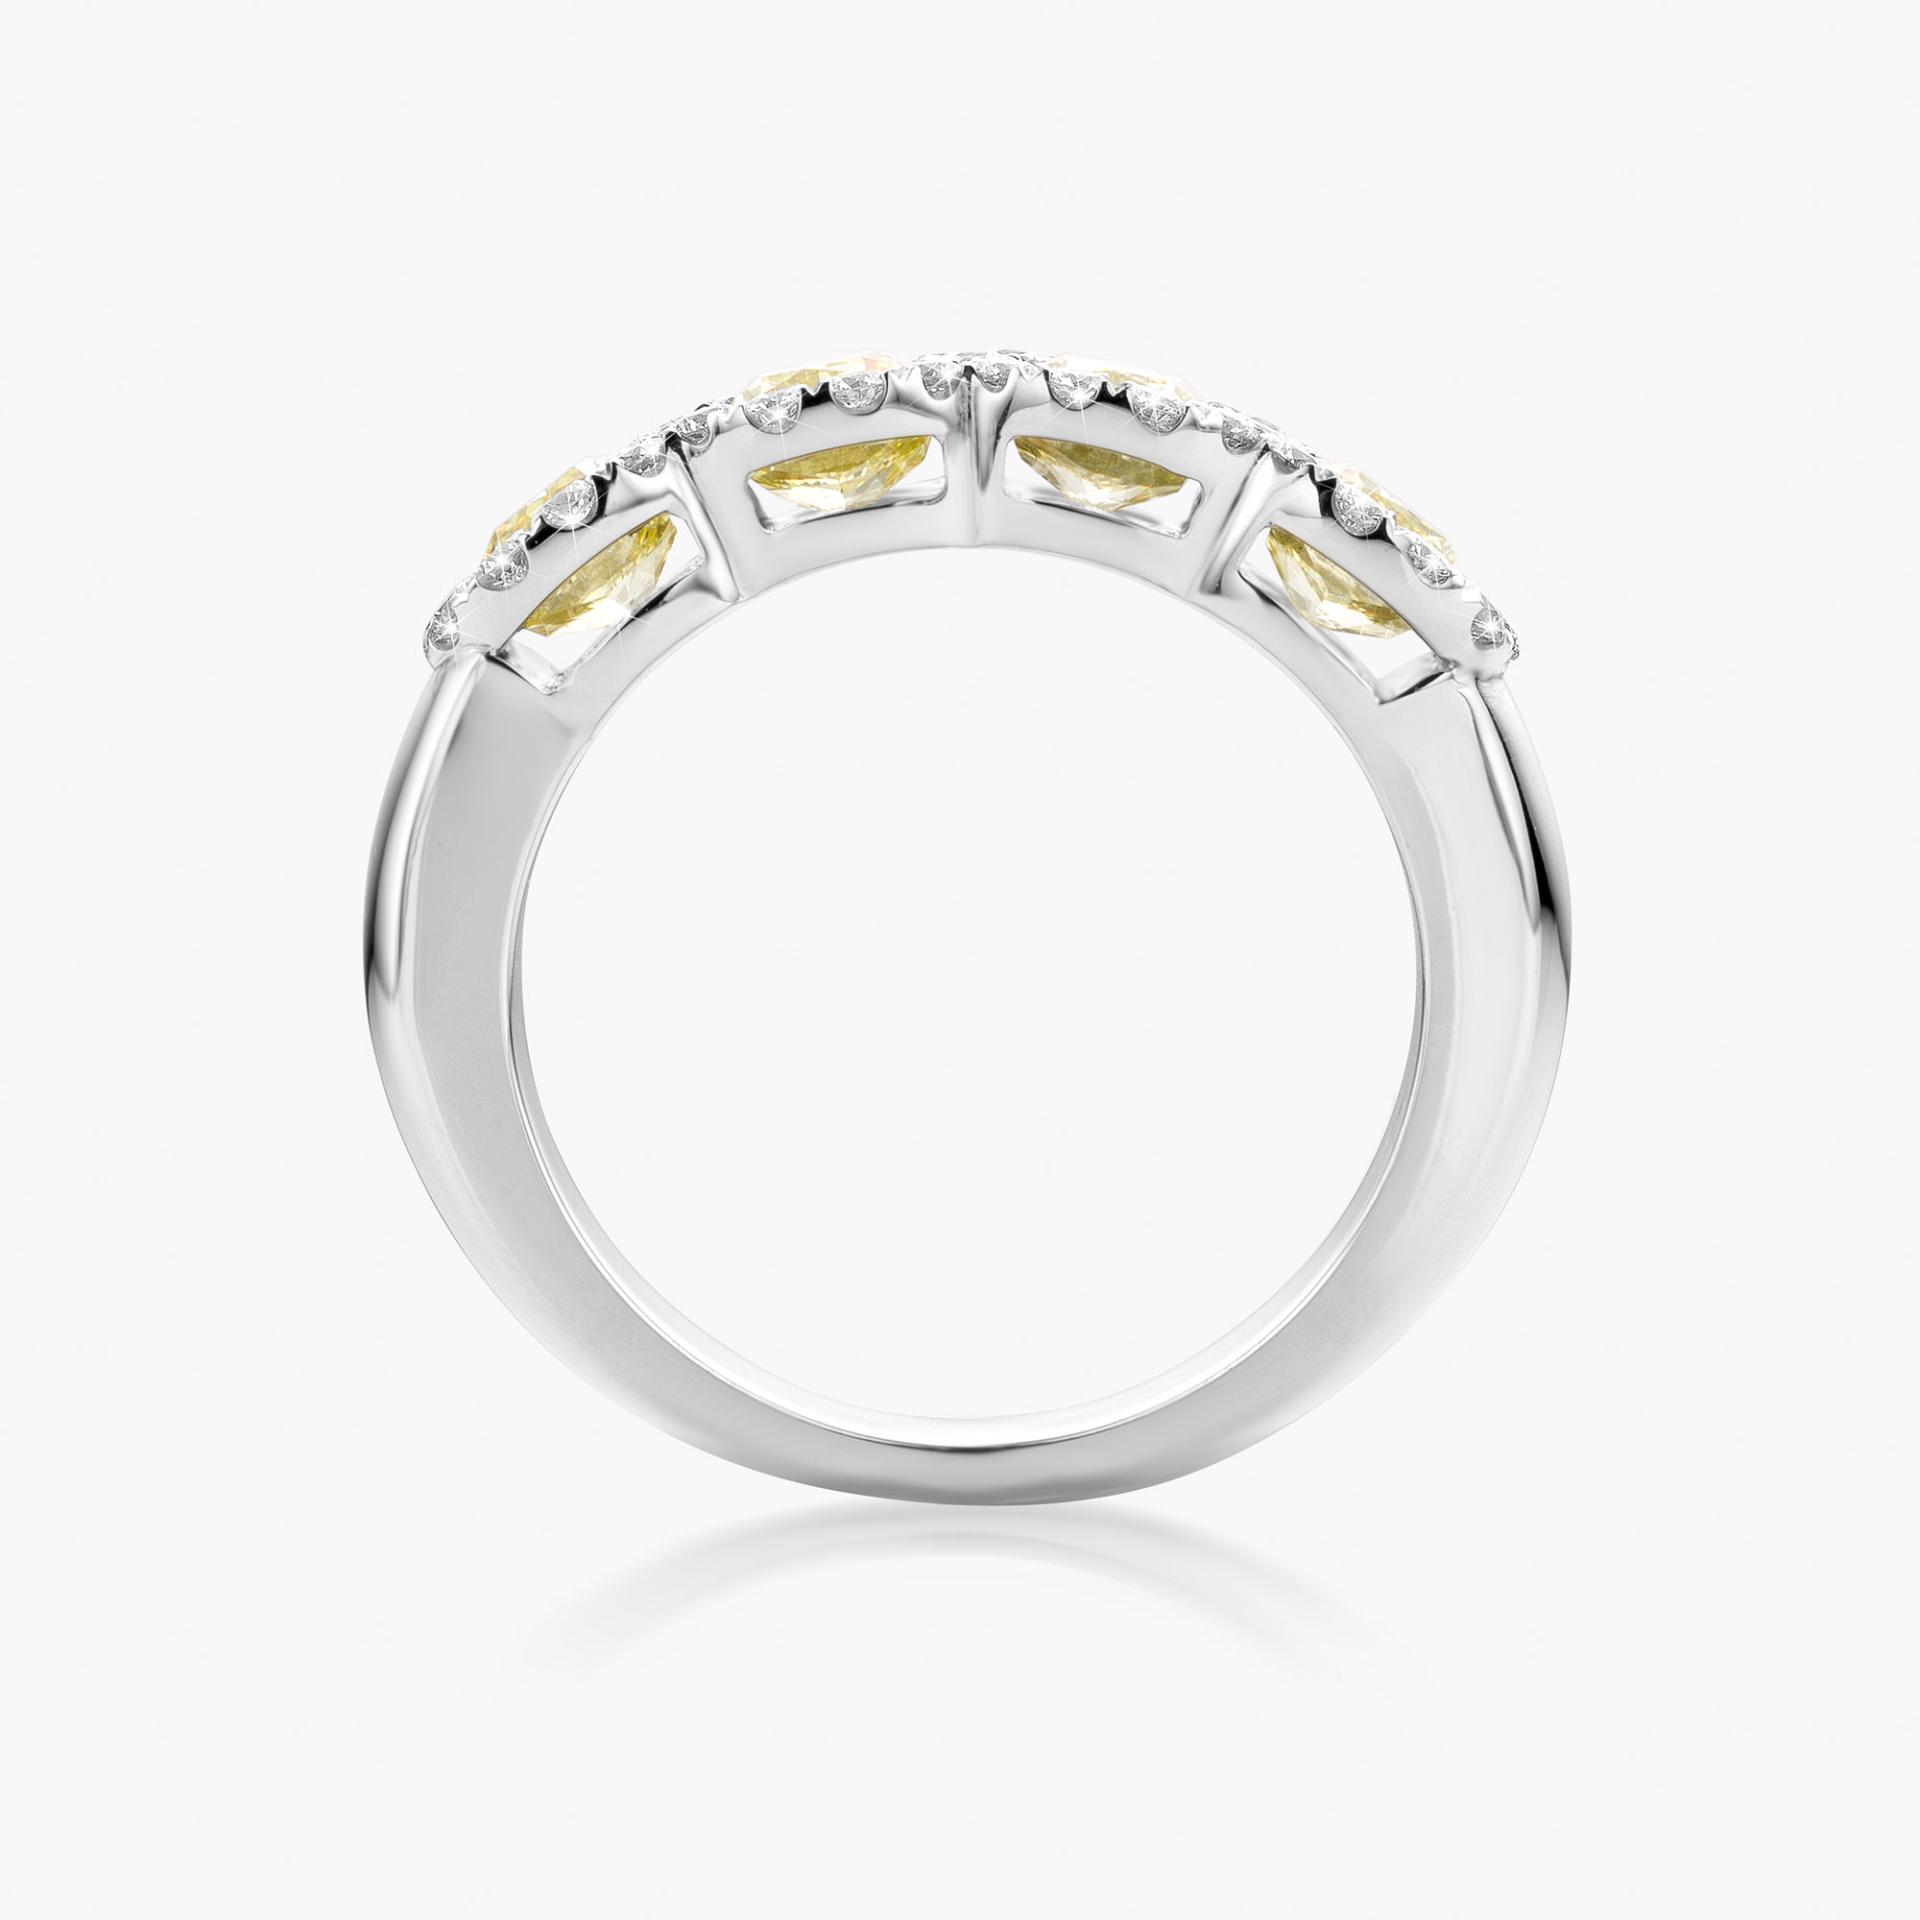 White gold ring set with cushion shaped yellow diamonds and diamonds made by Maison De Greef